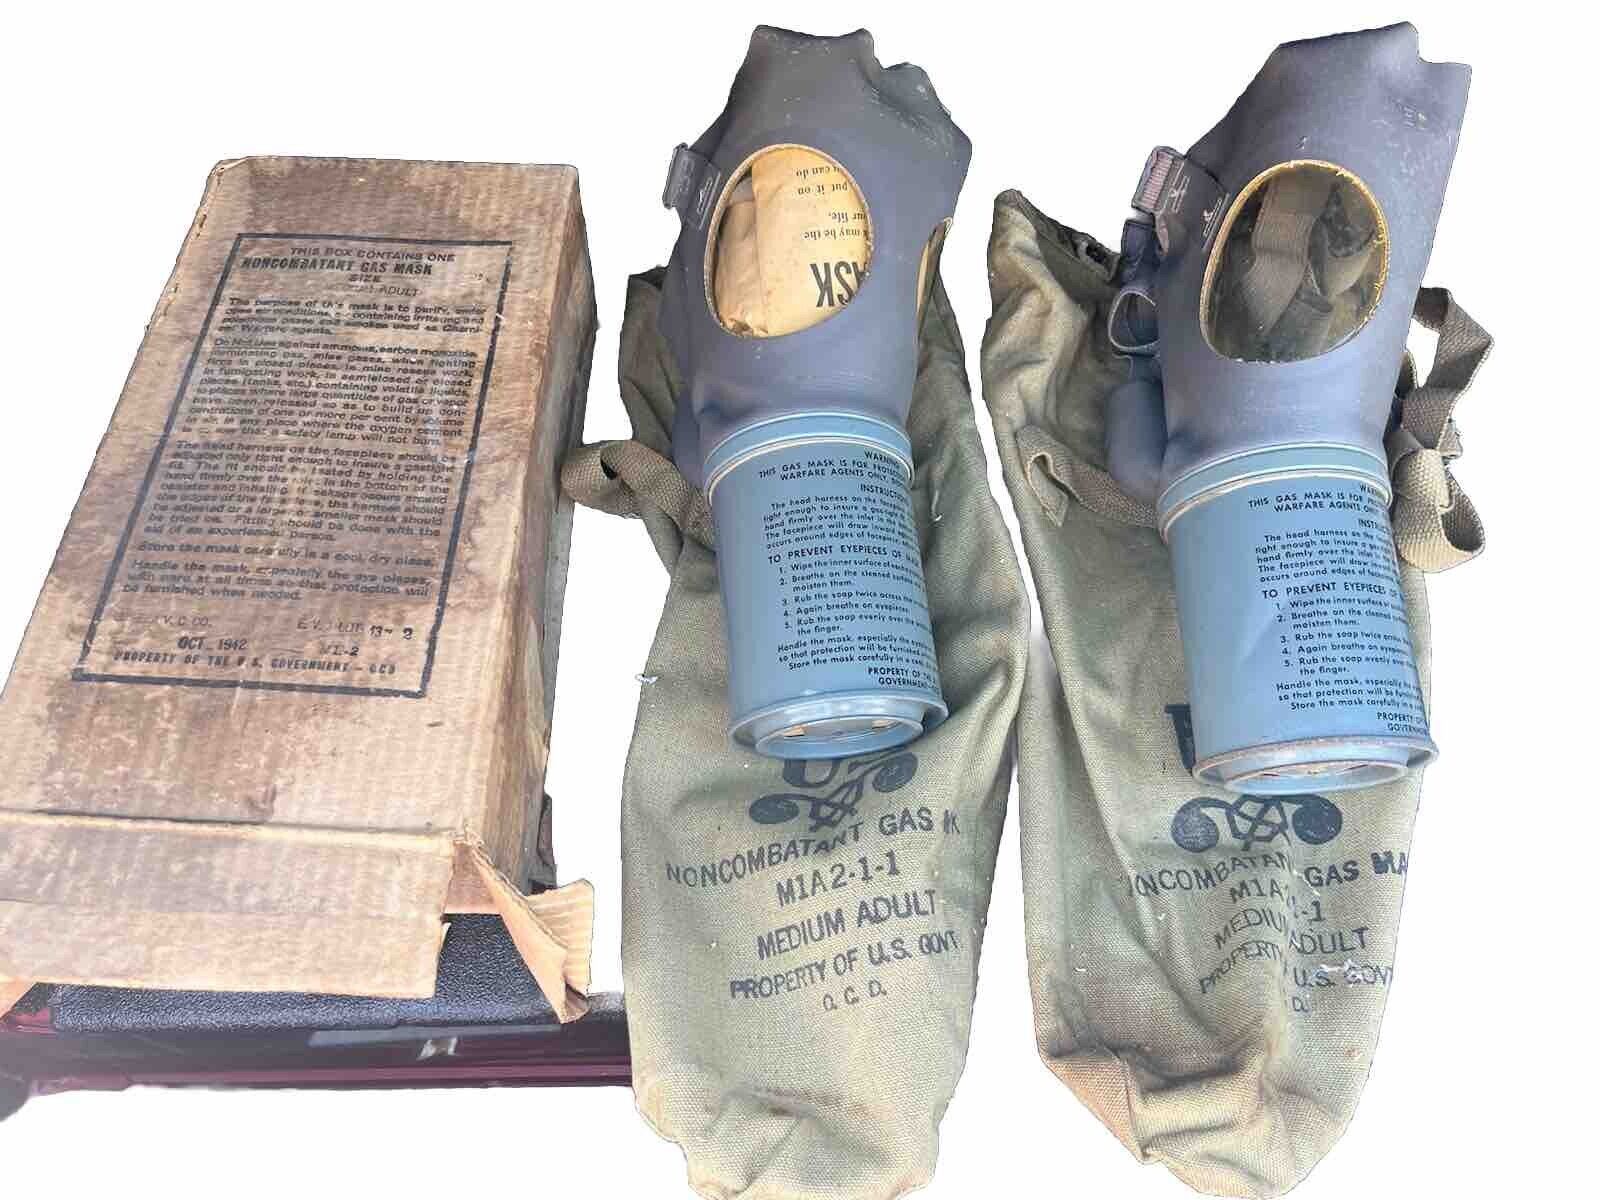 Vintage 1942 US Army Noncombatant Gas Mask MIA2-I-I Adult M Box Canister Set Lot